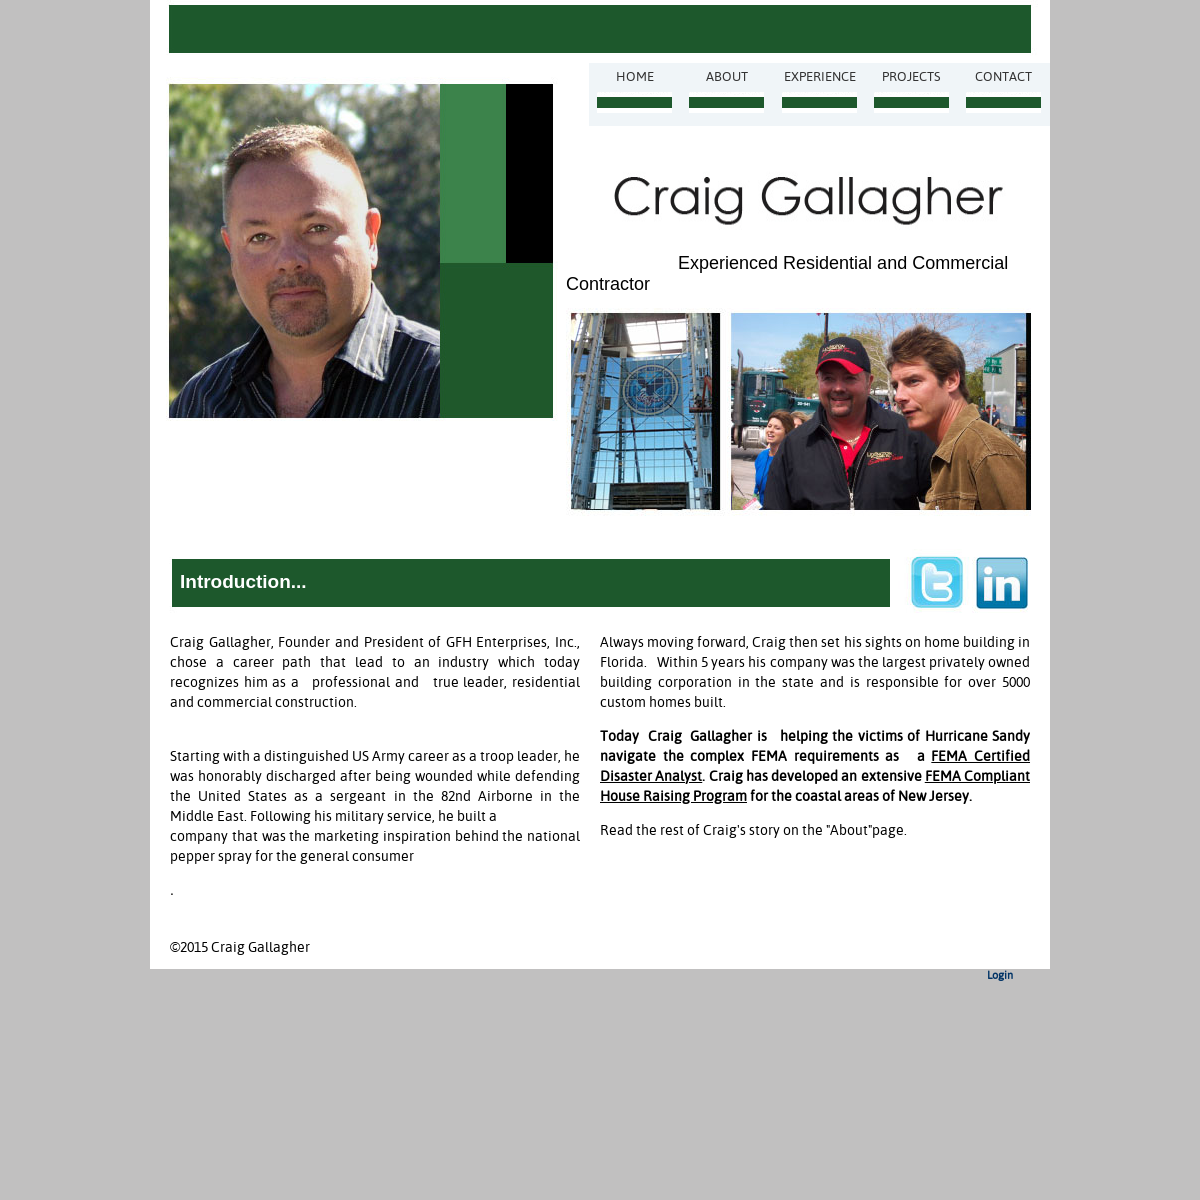 A complete backup of craiggallagher.net